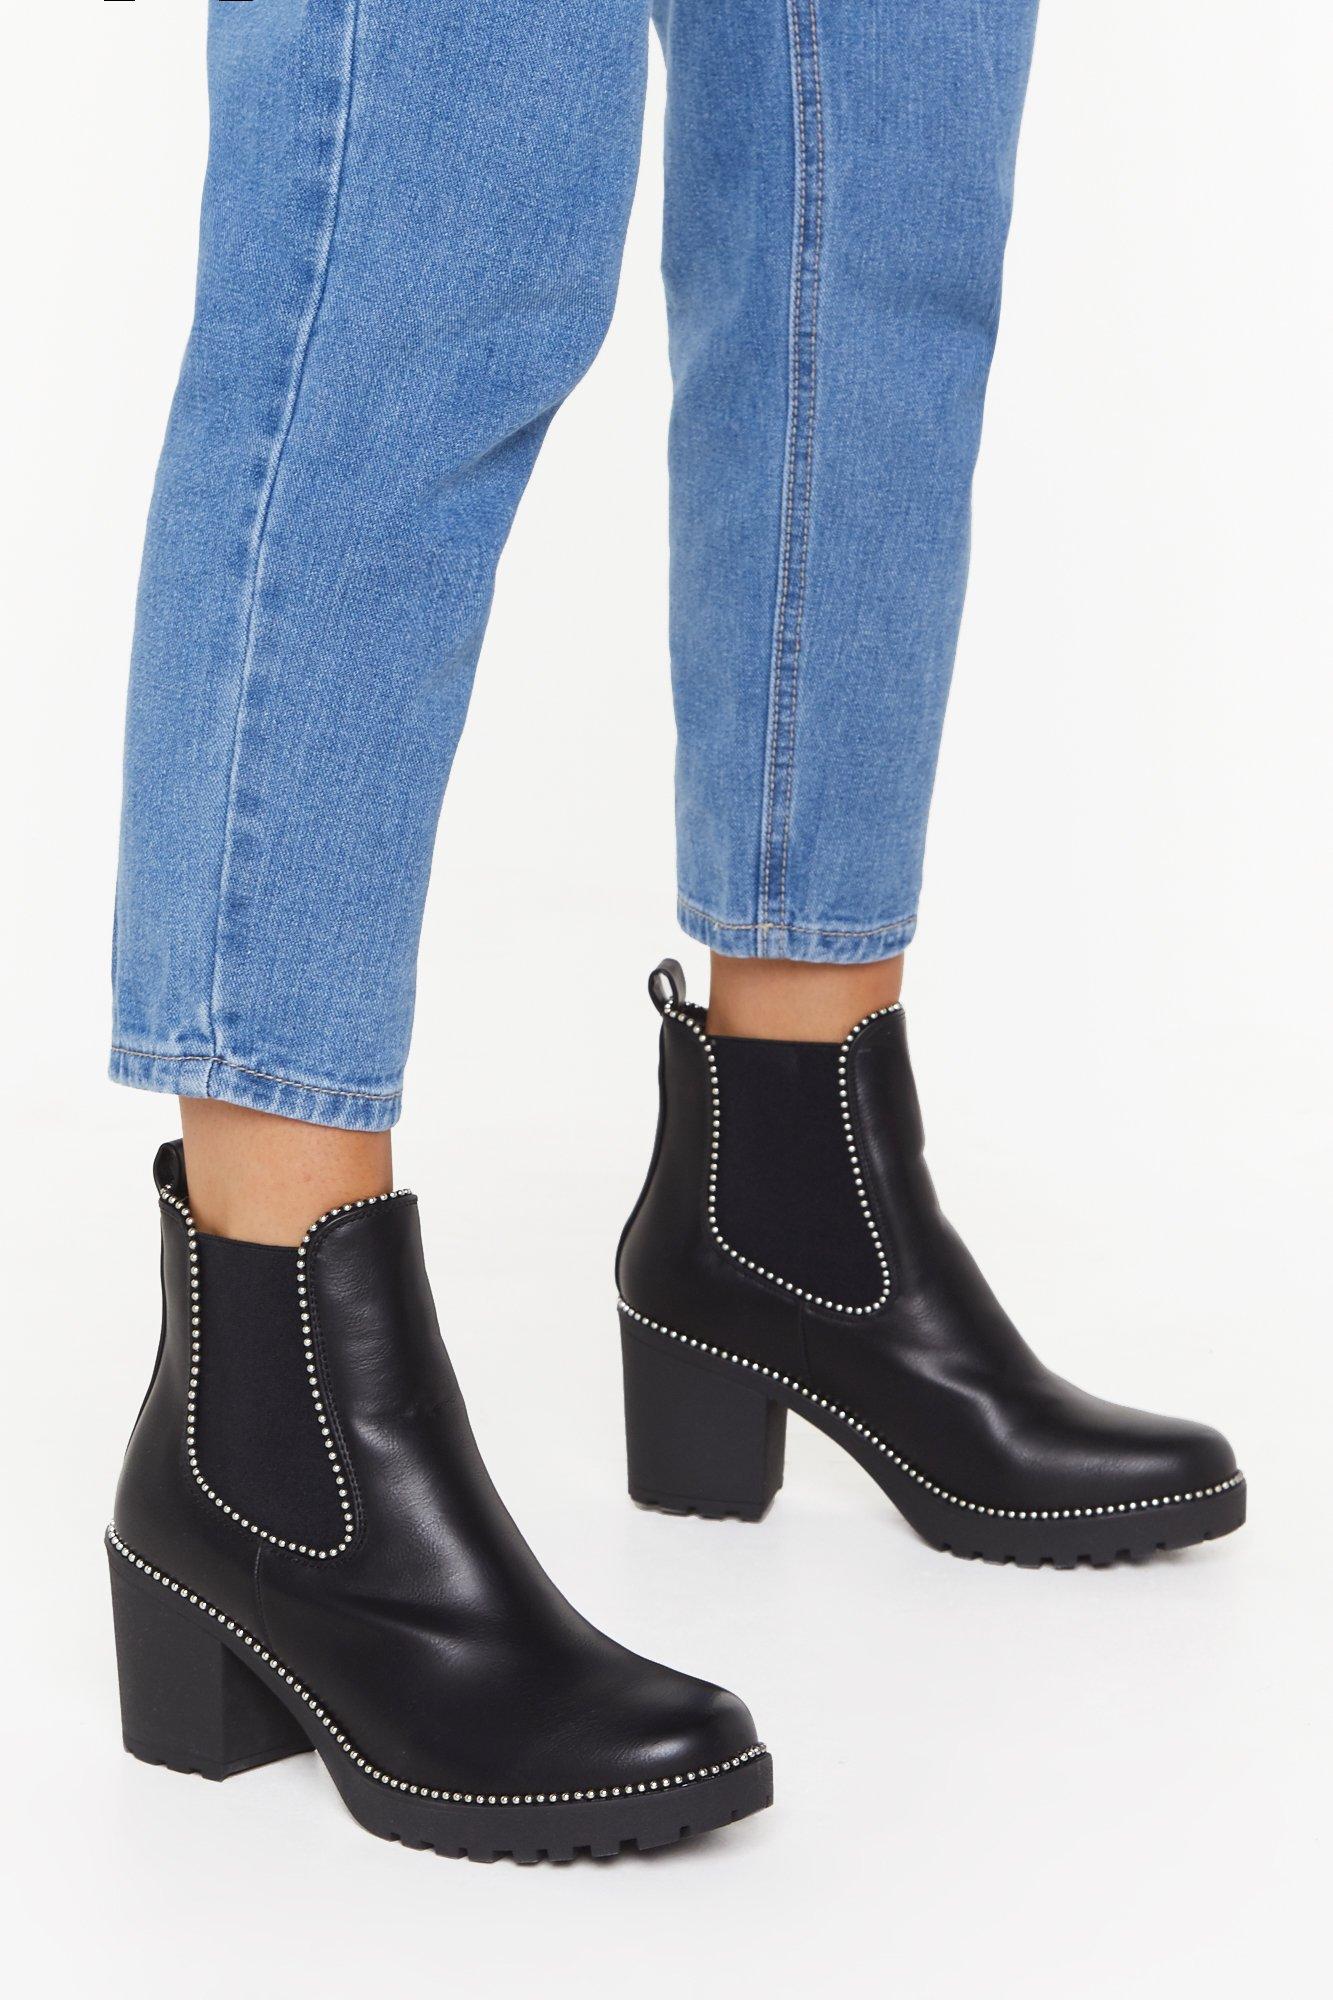 Ankle Boots | Women's Ankle Booties Online 2019 | Nasty Gal